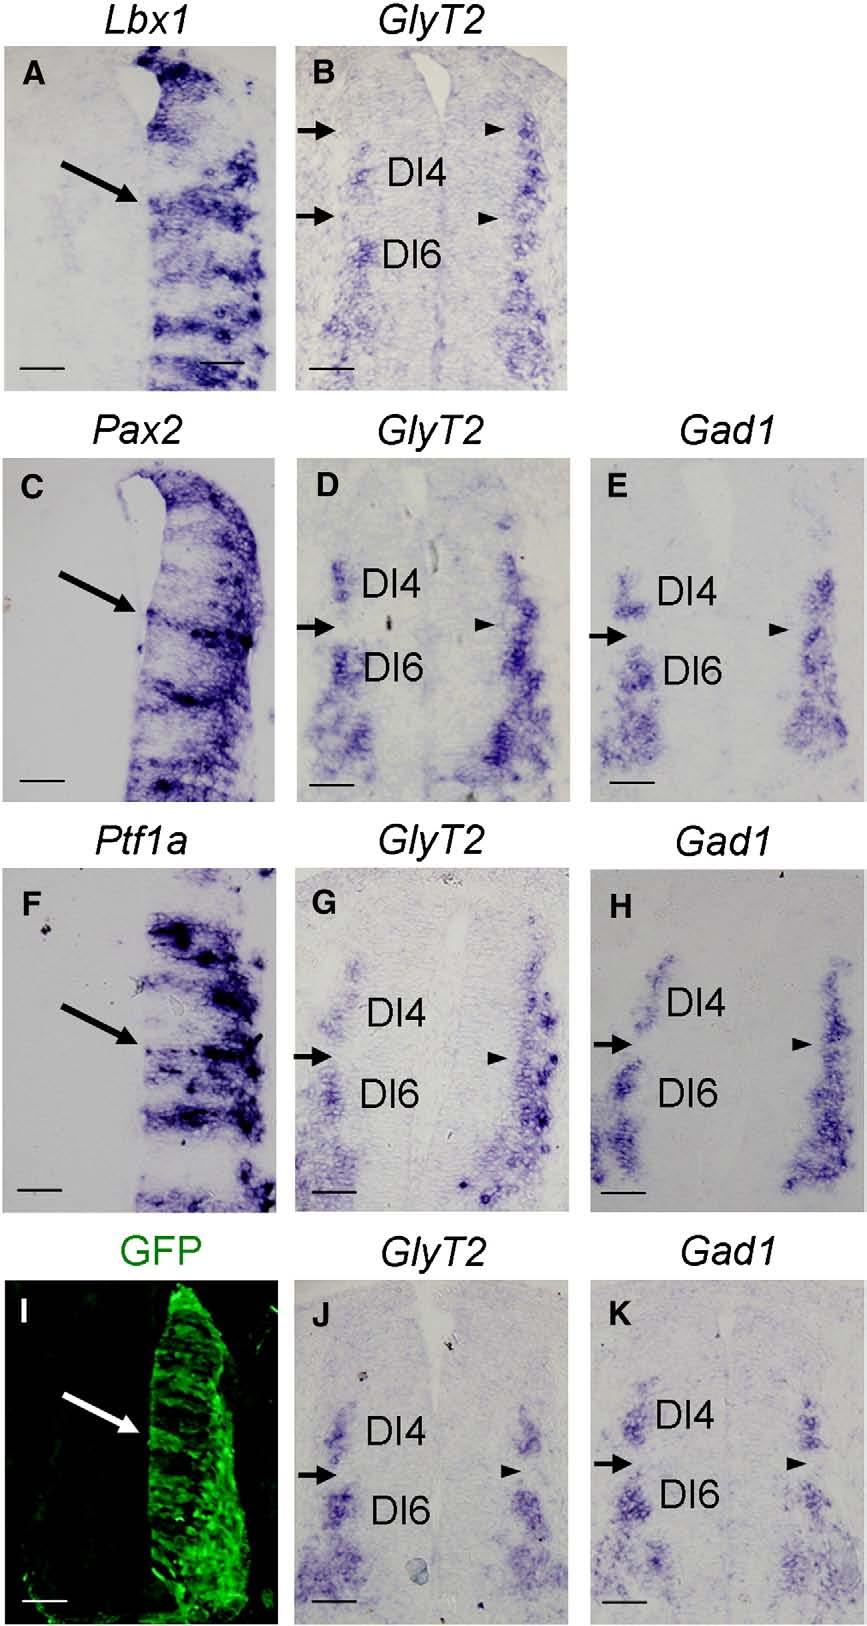 398 M. Huang et al. / Developmental Biology 322 (2008) 394 405 Fig. 2. Overexpression of Lbx1, Pax2 or Ptf1a in the chick neural tube promotes ectopic glycinergic and GABAergic differentiation.